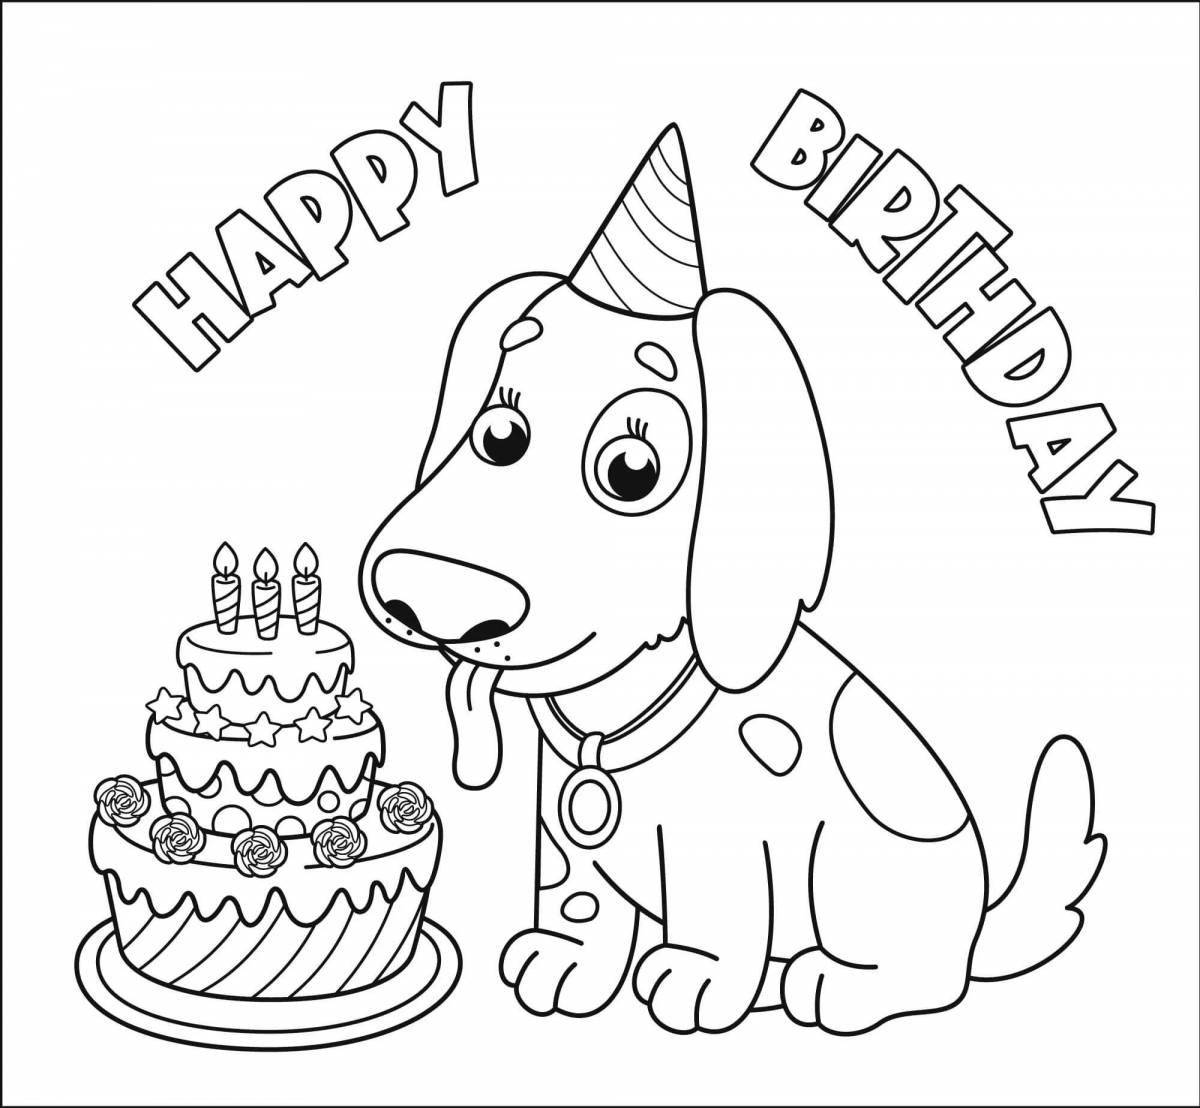 Fancy 10th birthday coloring book